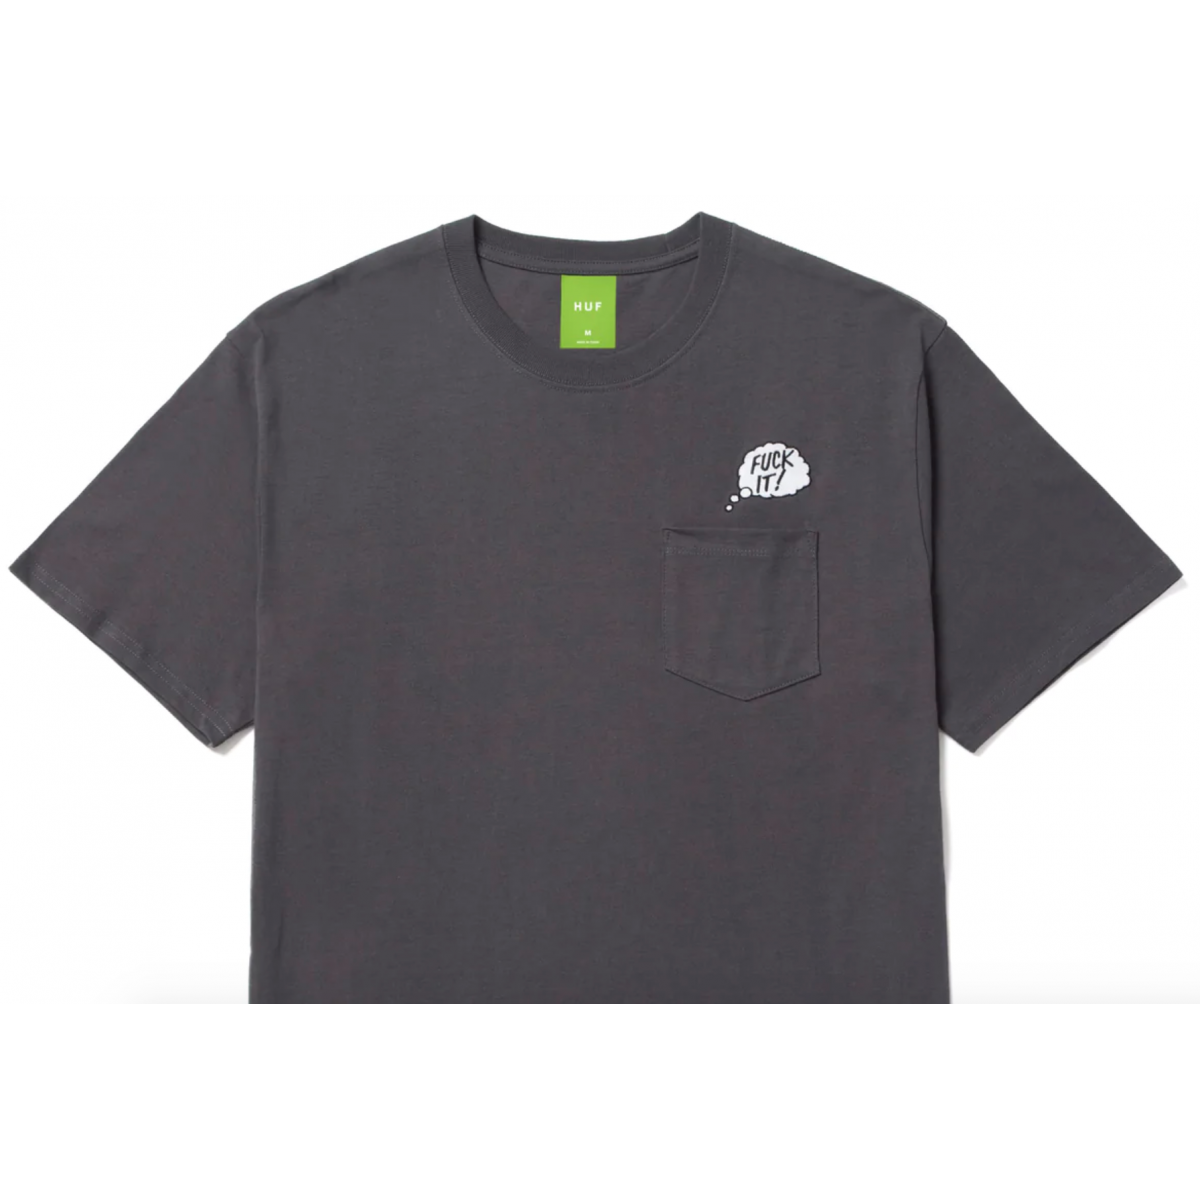 IN THE POCKET S/S TEE - CHARCOAL